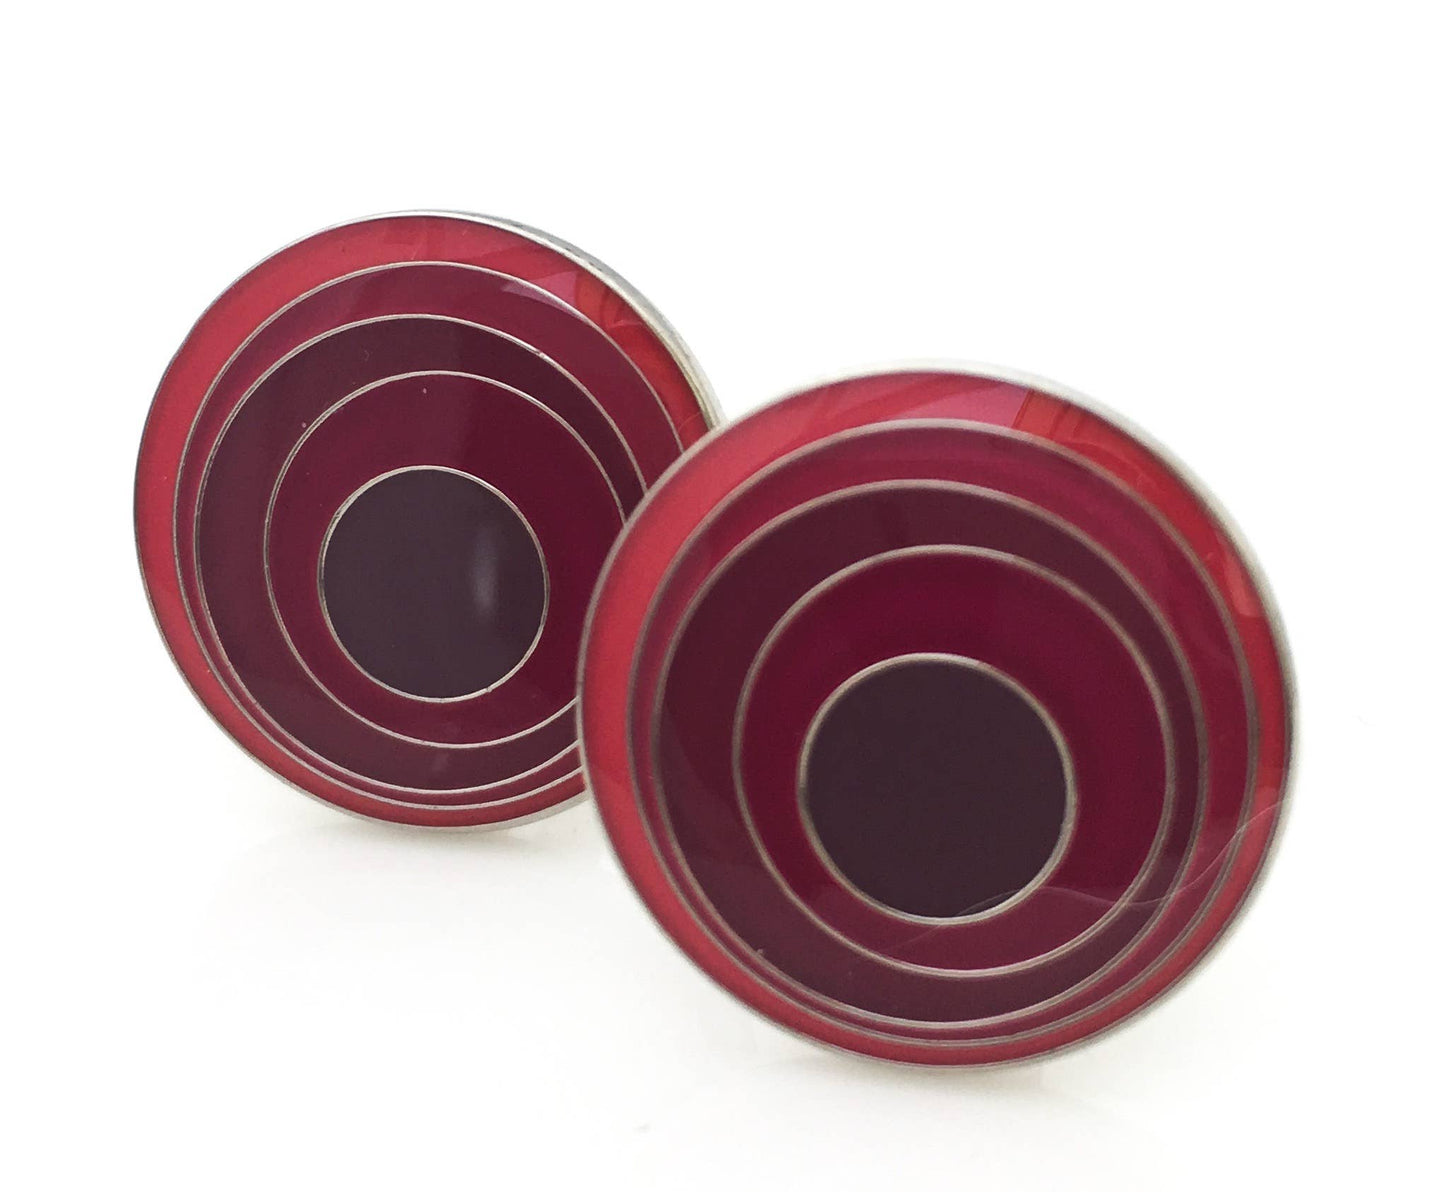 Round cufflinks with circles within circles in pinks